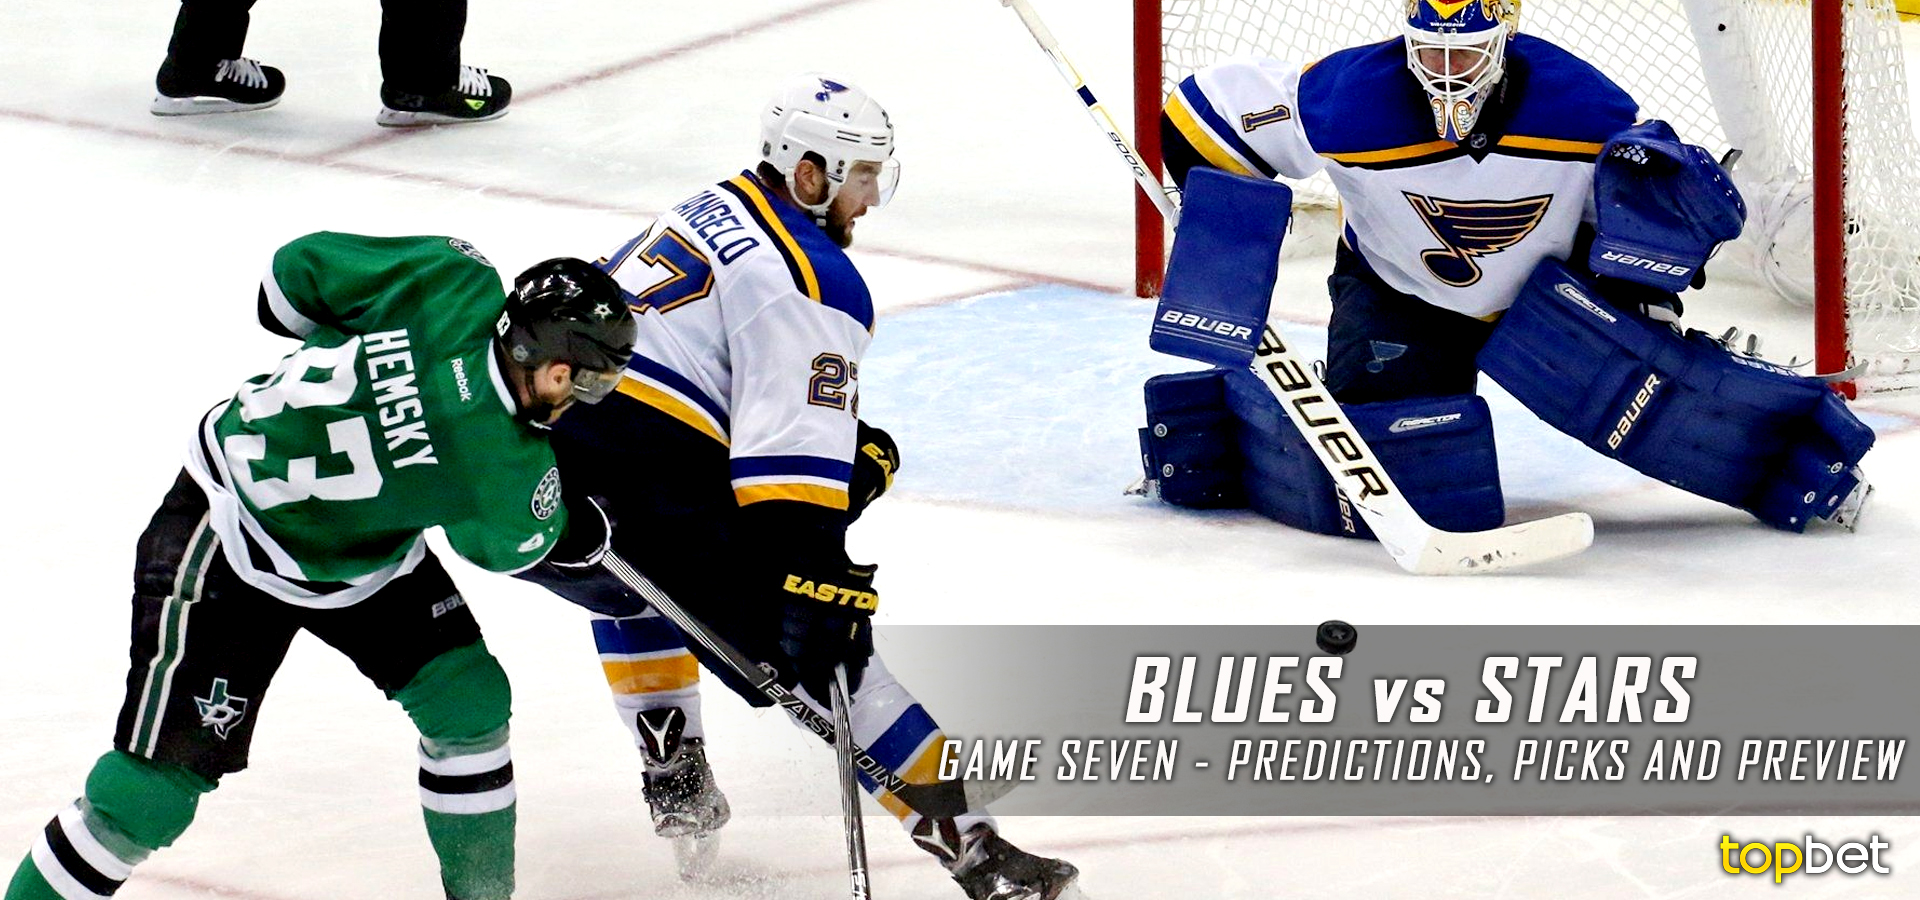 Blues vs Stars Series Game 7 Predictions, Picks and Preview